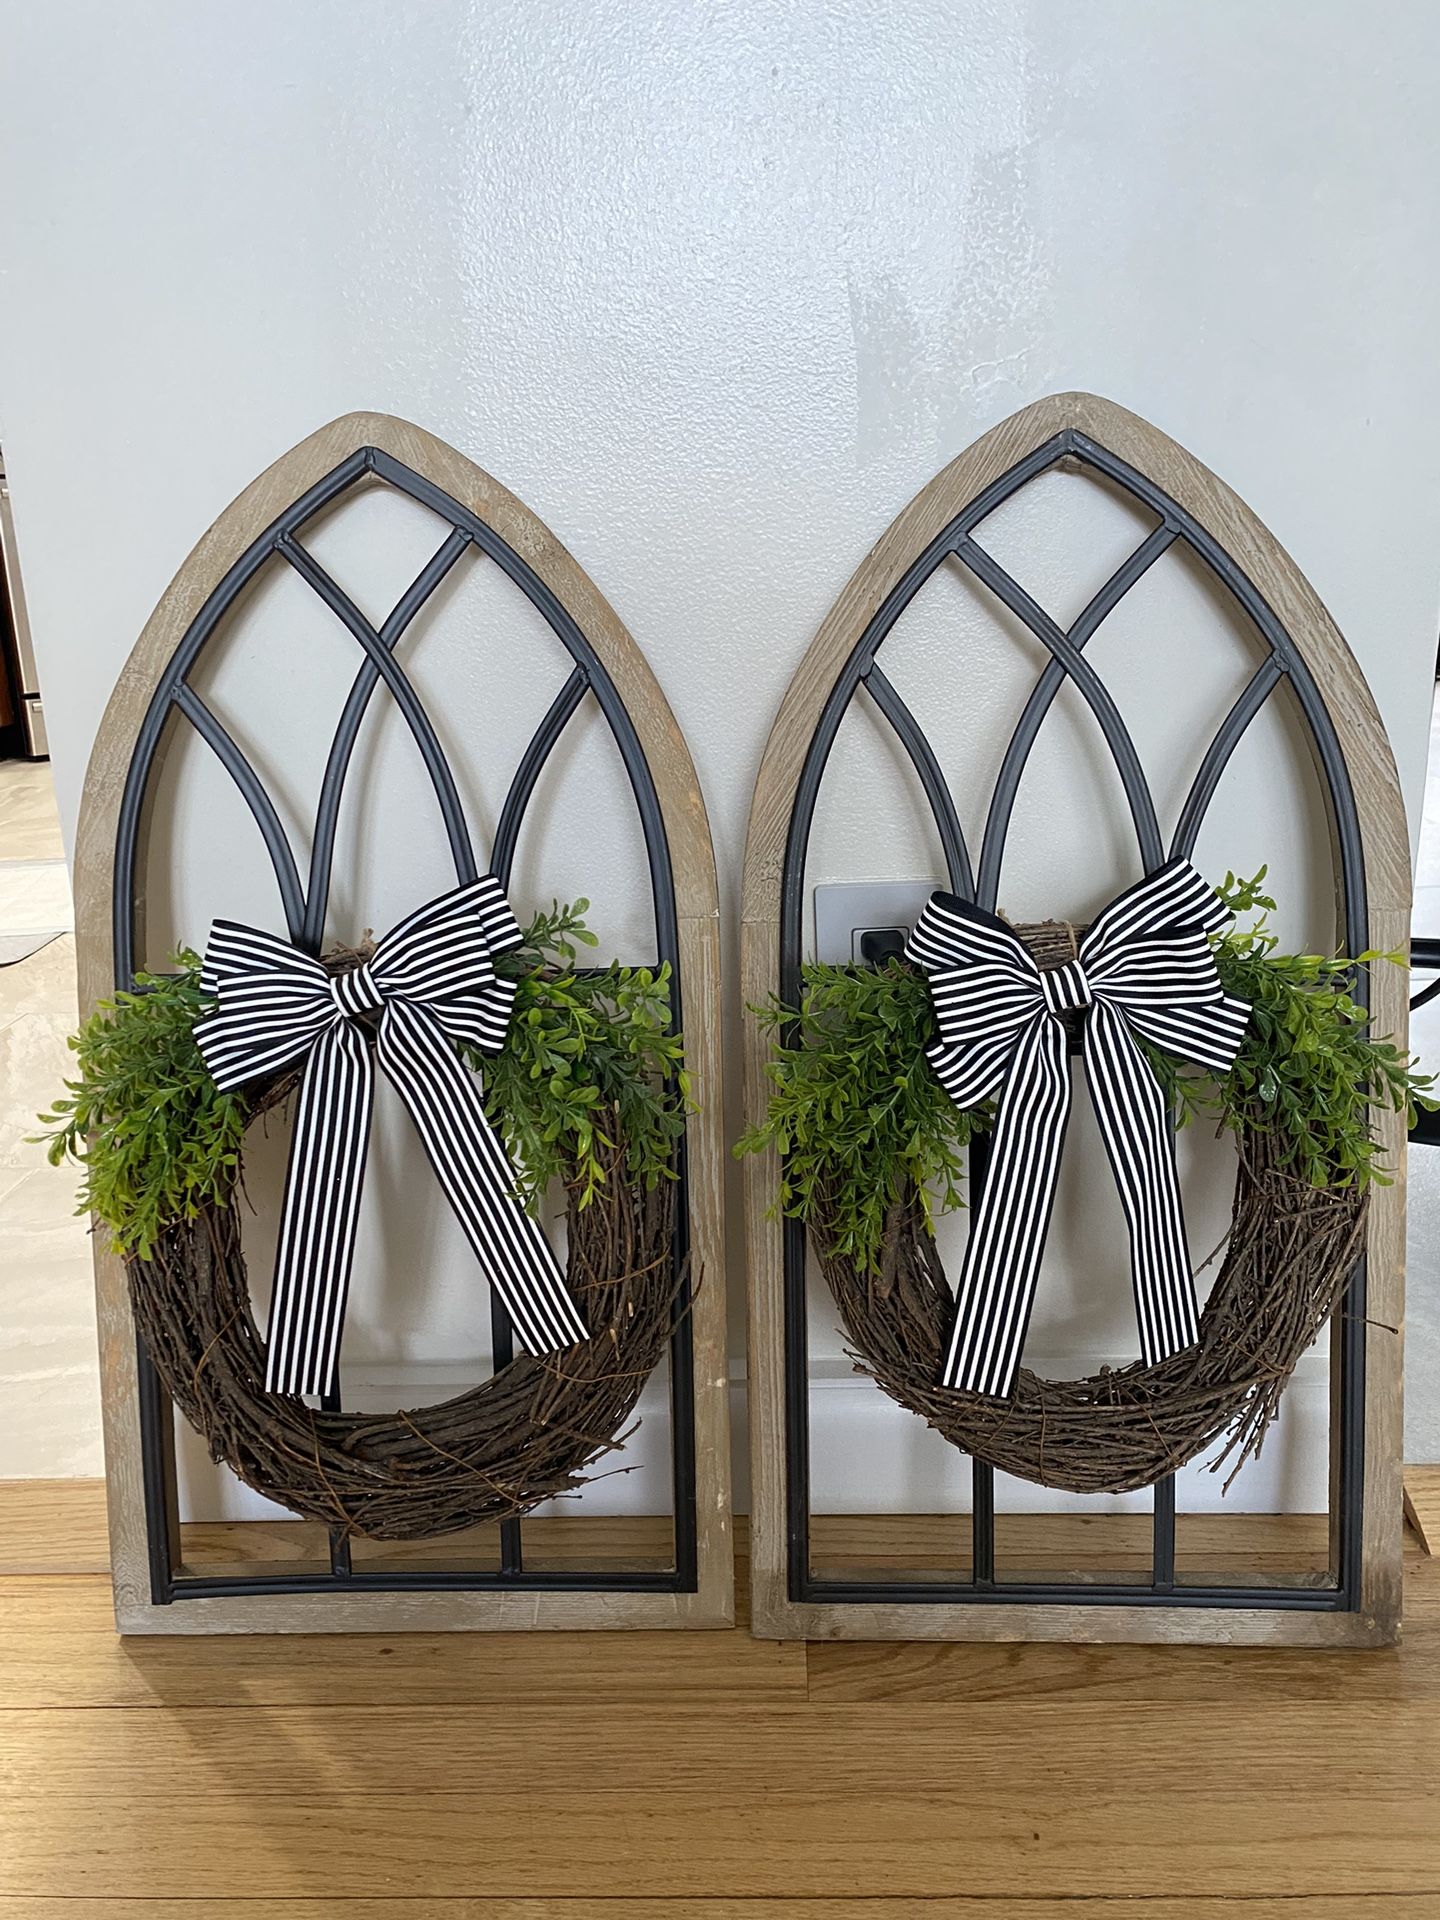 2 Cathedral Window Frames With Wreath